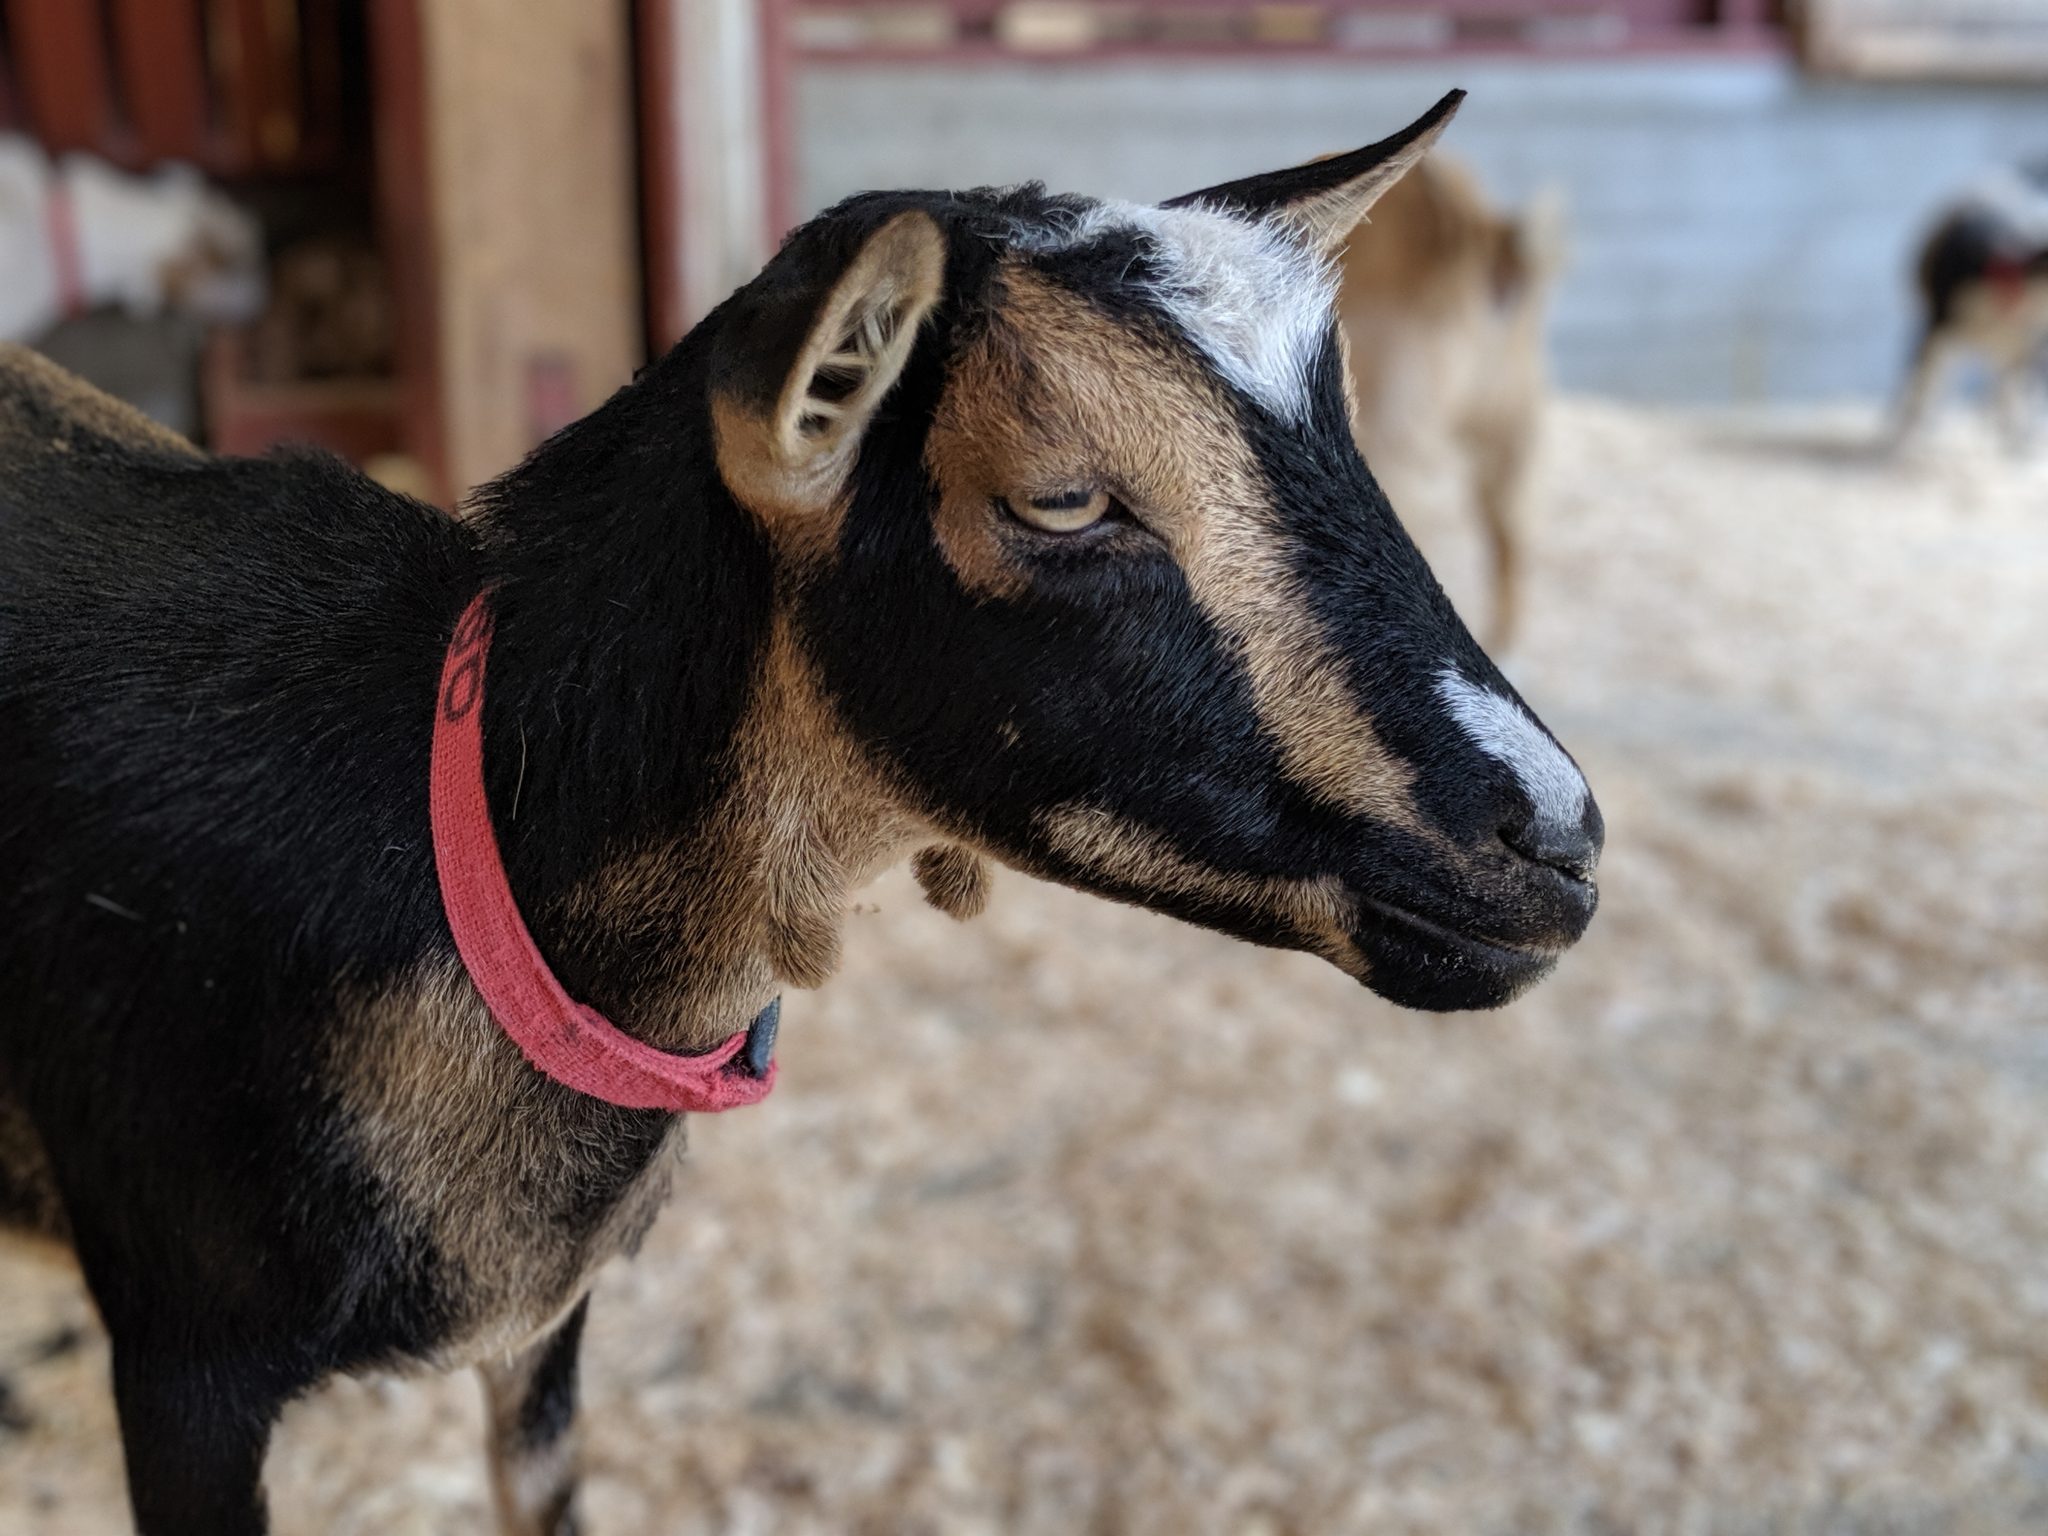 Bored looking goat